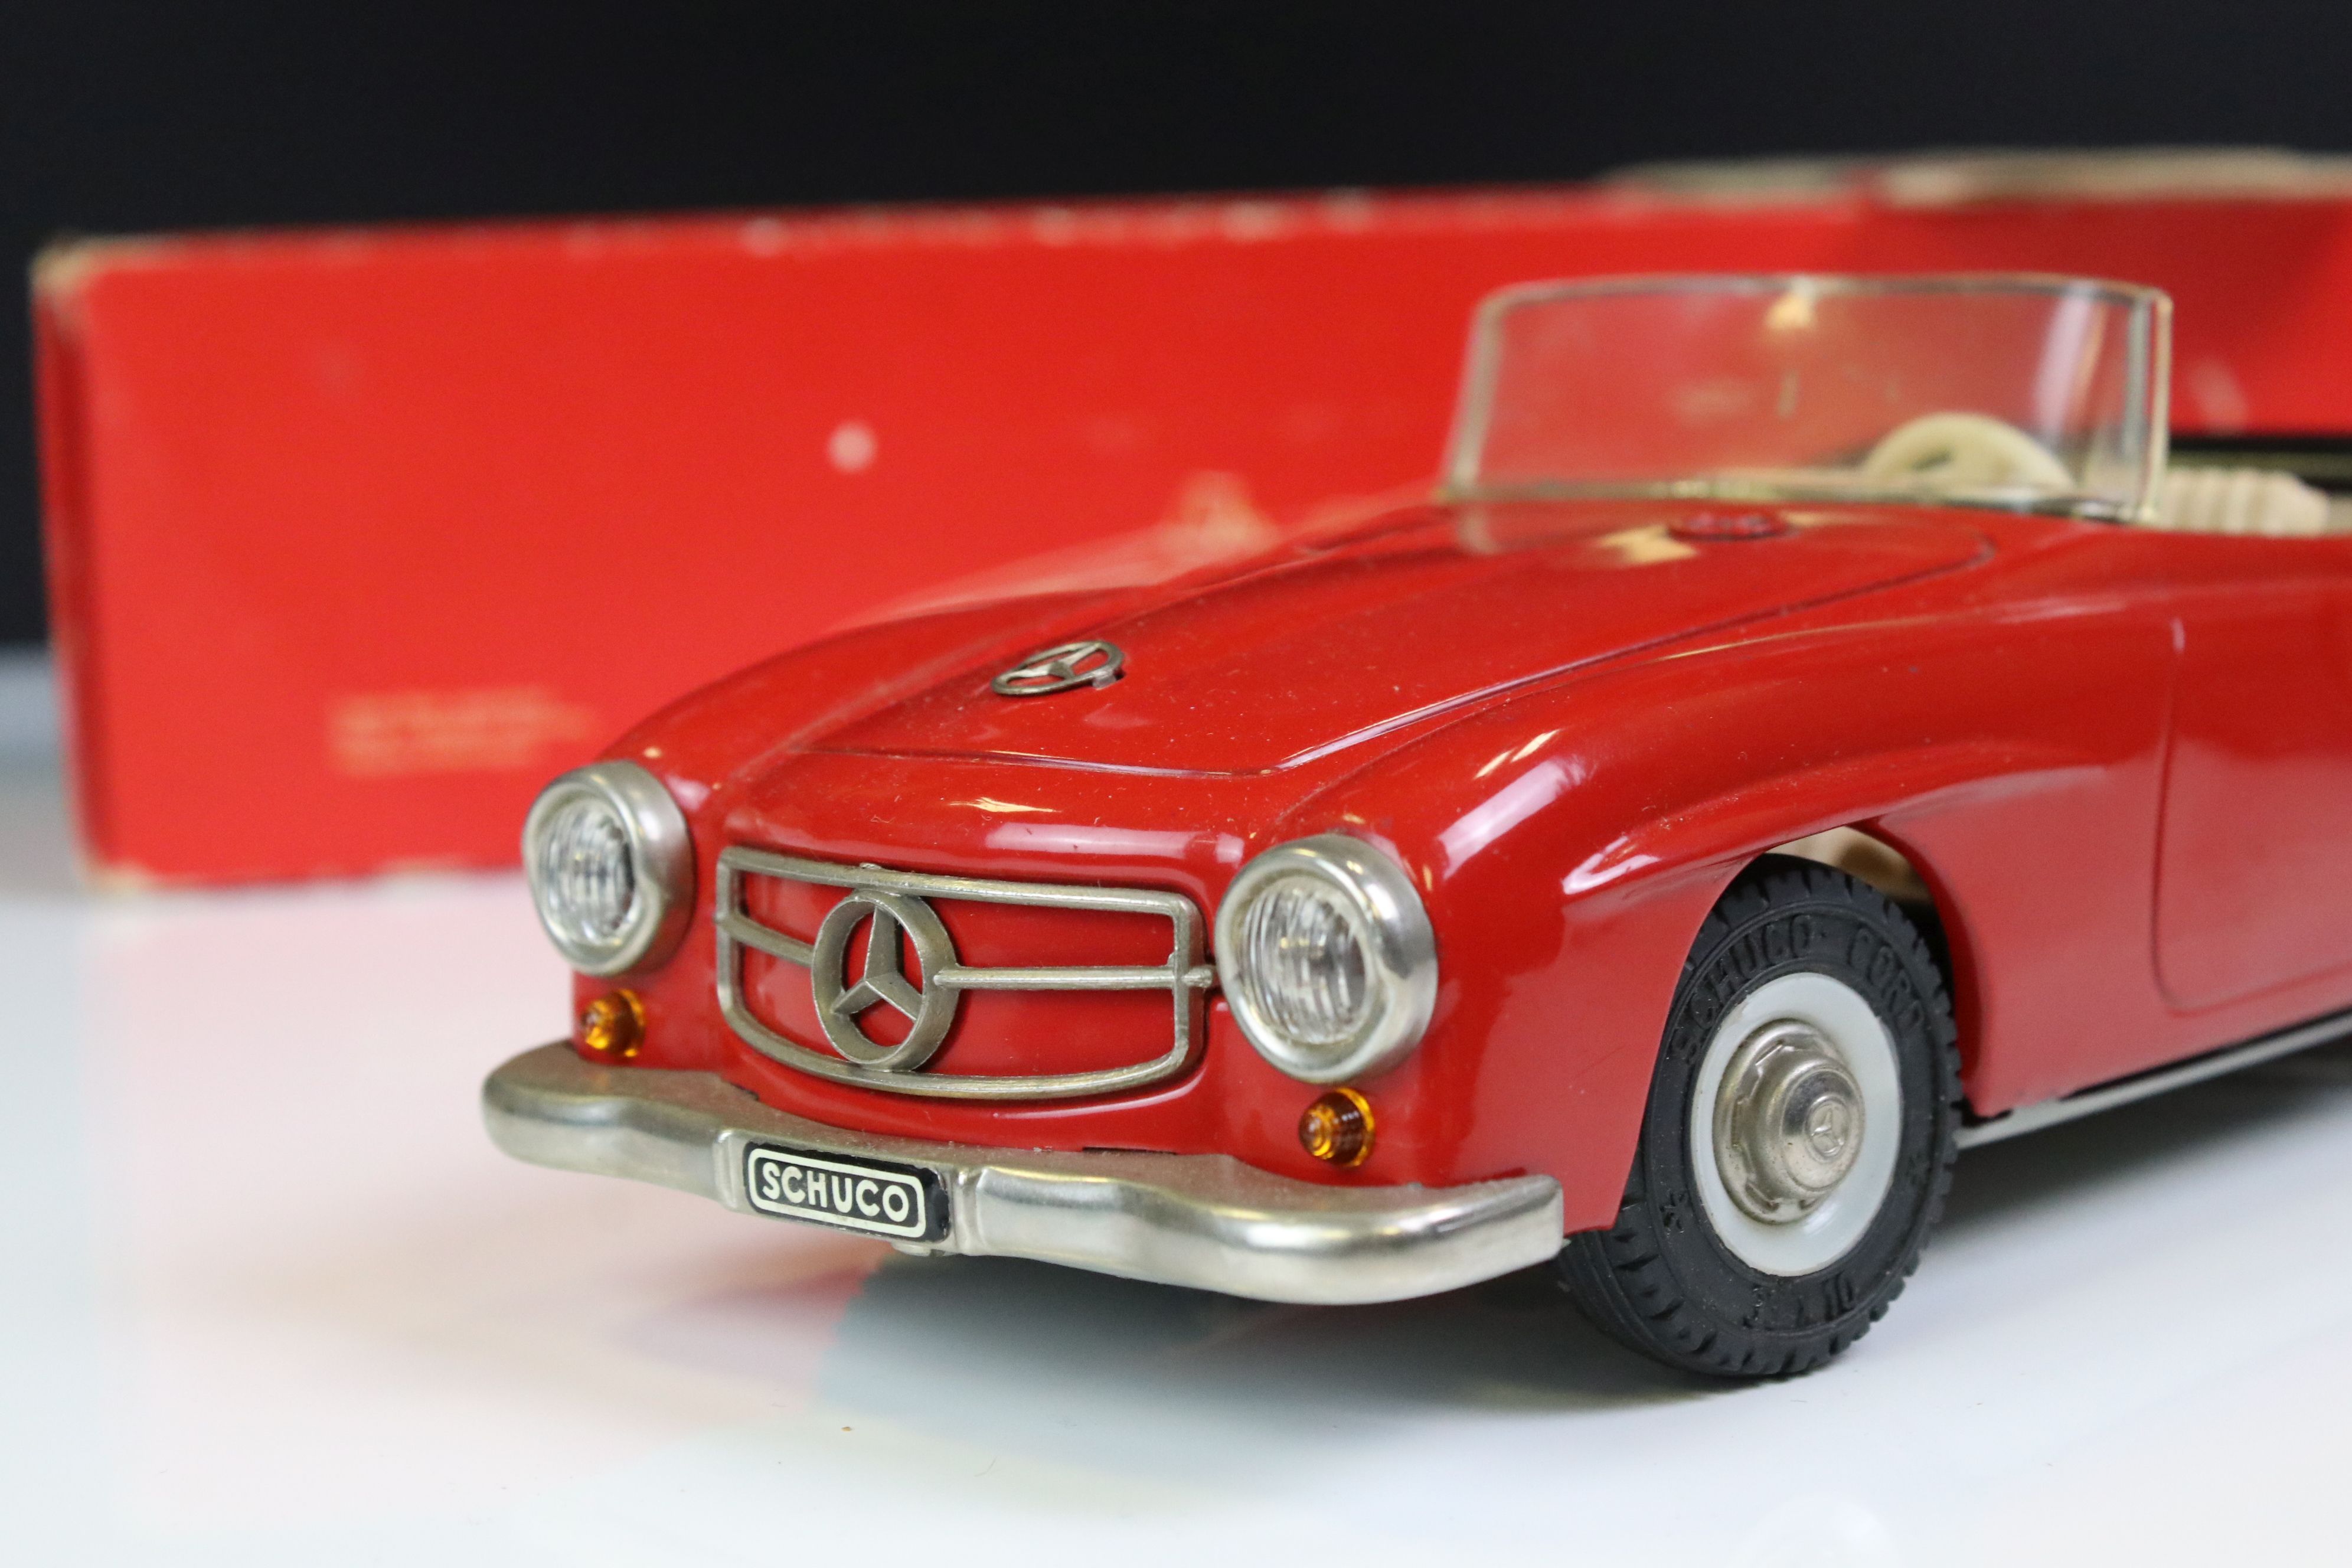 Schuco Clockwork tinplate remote control 2095 Mercedes 190 SL in red, with instructions and box tray - Bild 2 aus 9